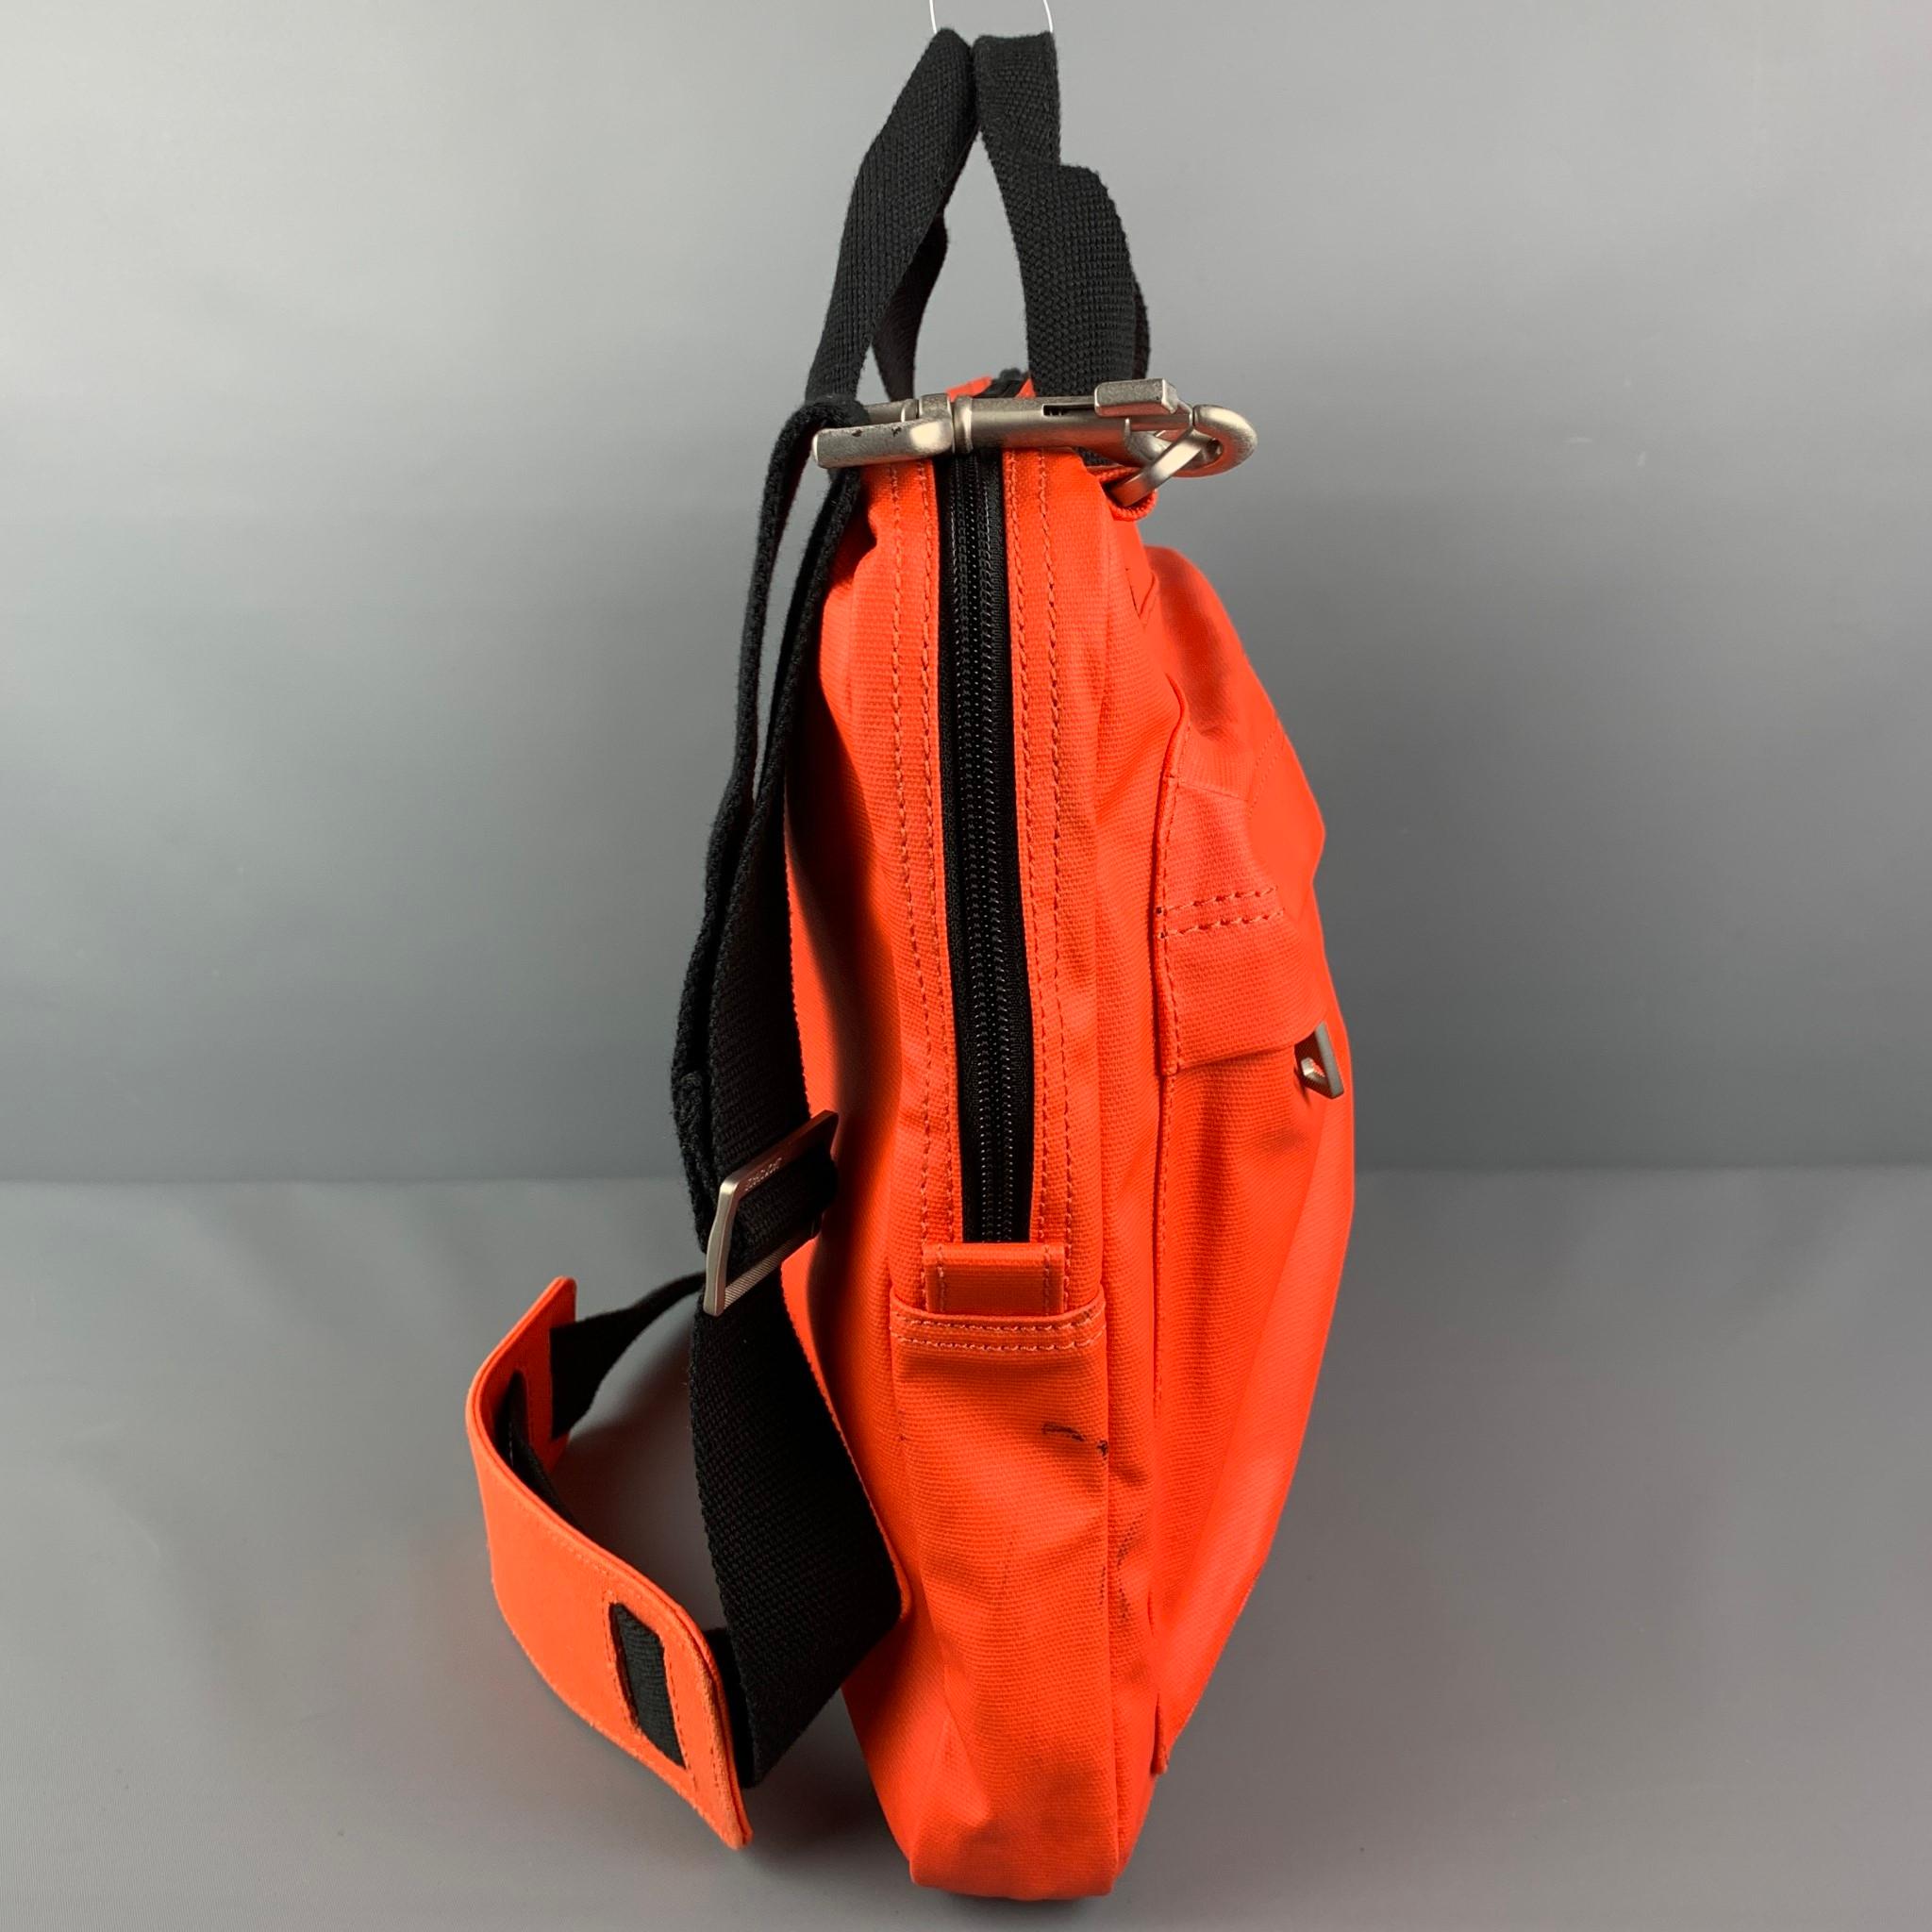 JACK SPADE bag comes in a orange canvas featuring a black detachable cross body strap, top handles, large front pocket, inner slots, zipper closure. 

Good Pre-Owned Condition. Minor marks at back & side of bag.

Measurements:

Length: 15.5